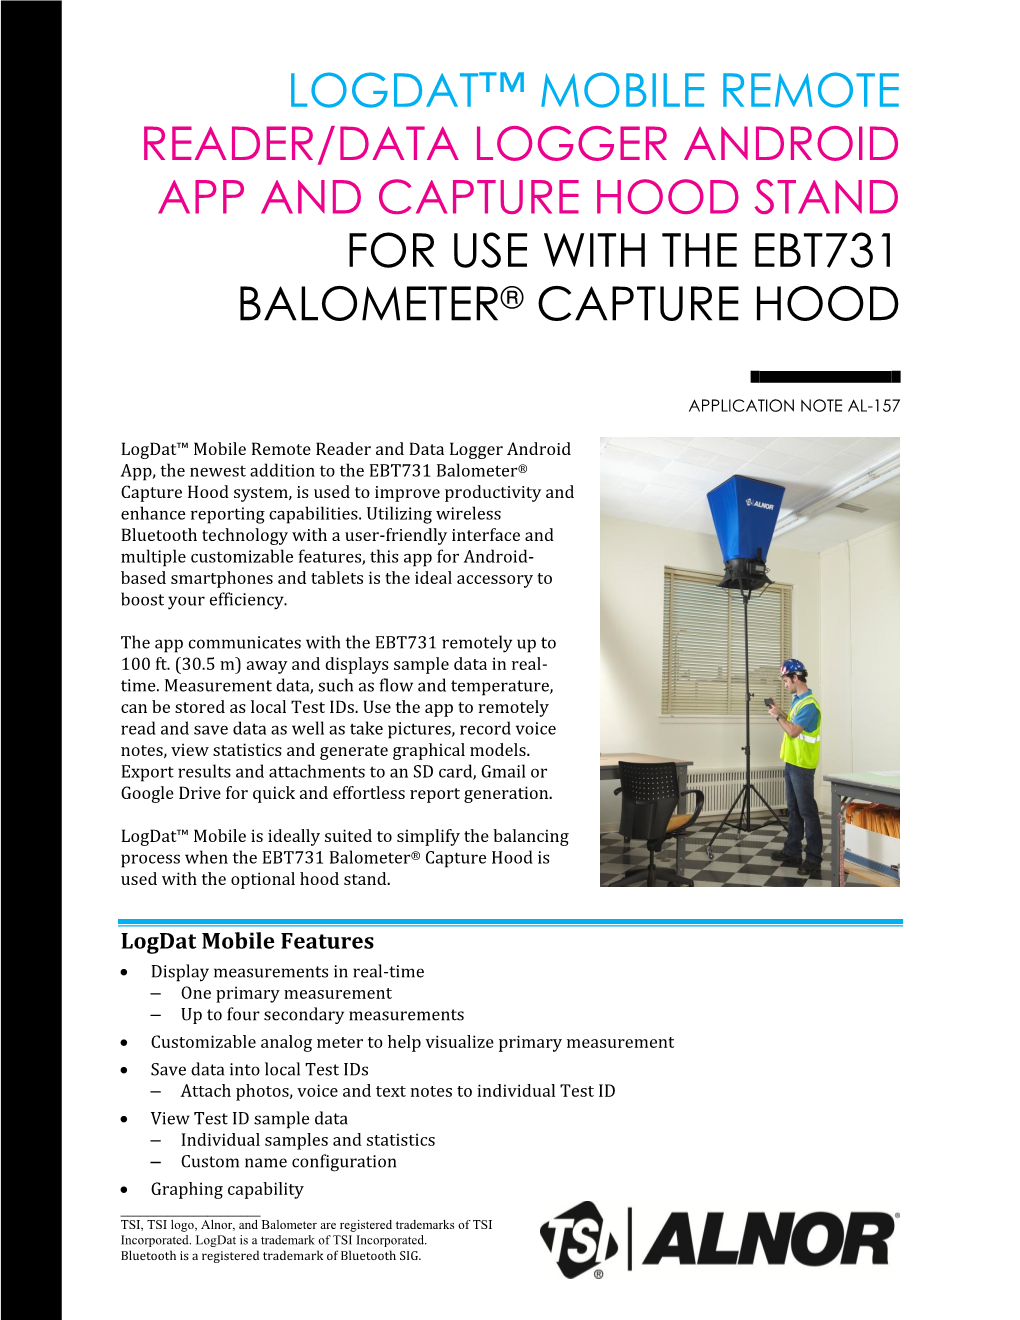 Reader/Data Logger Android App and Capture Hood Stand for Use with the Ebt731 Balometer® Capture Hood